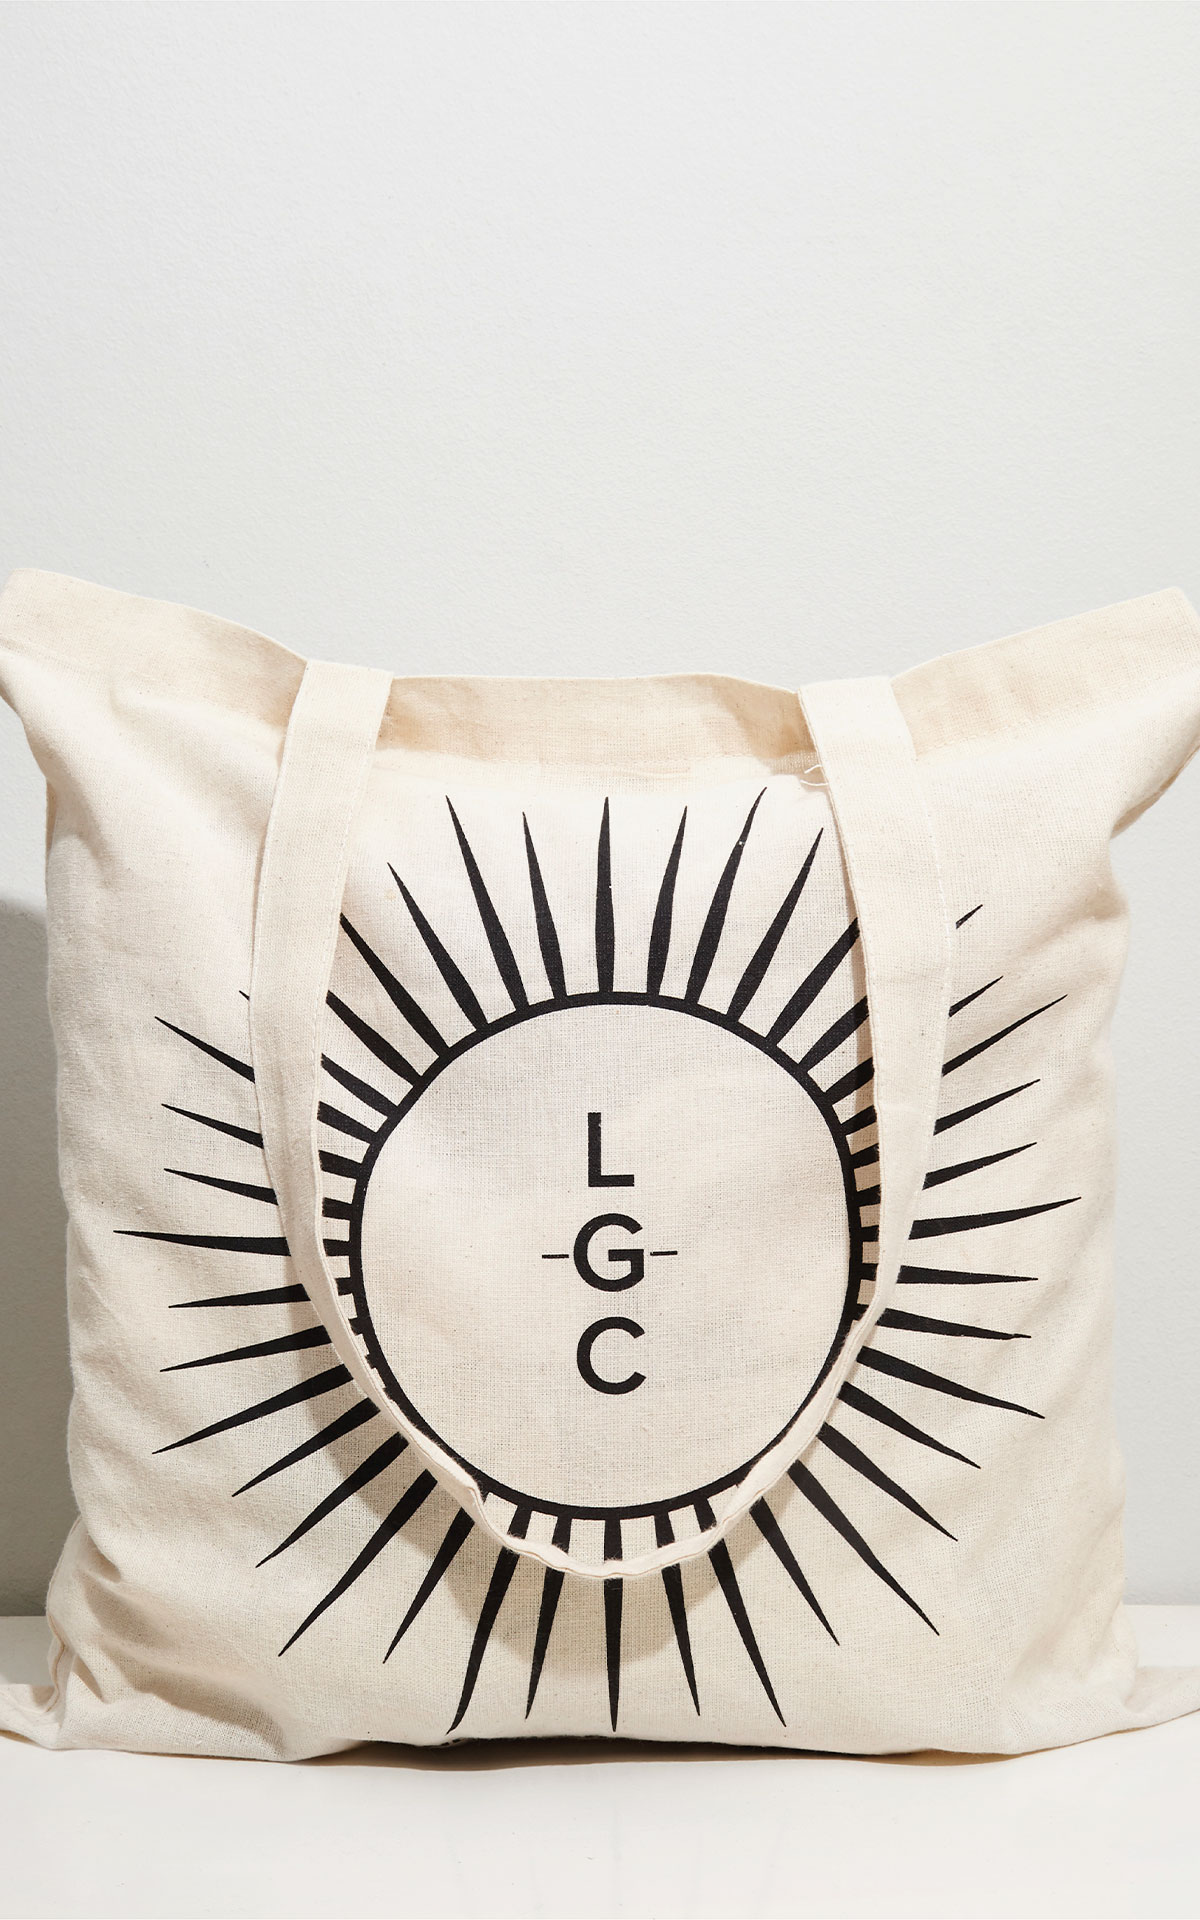 London Grade Coffee Tote bag from Bicester Village